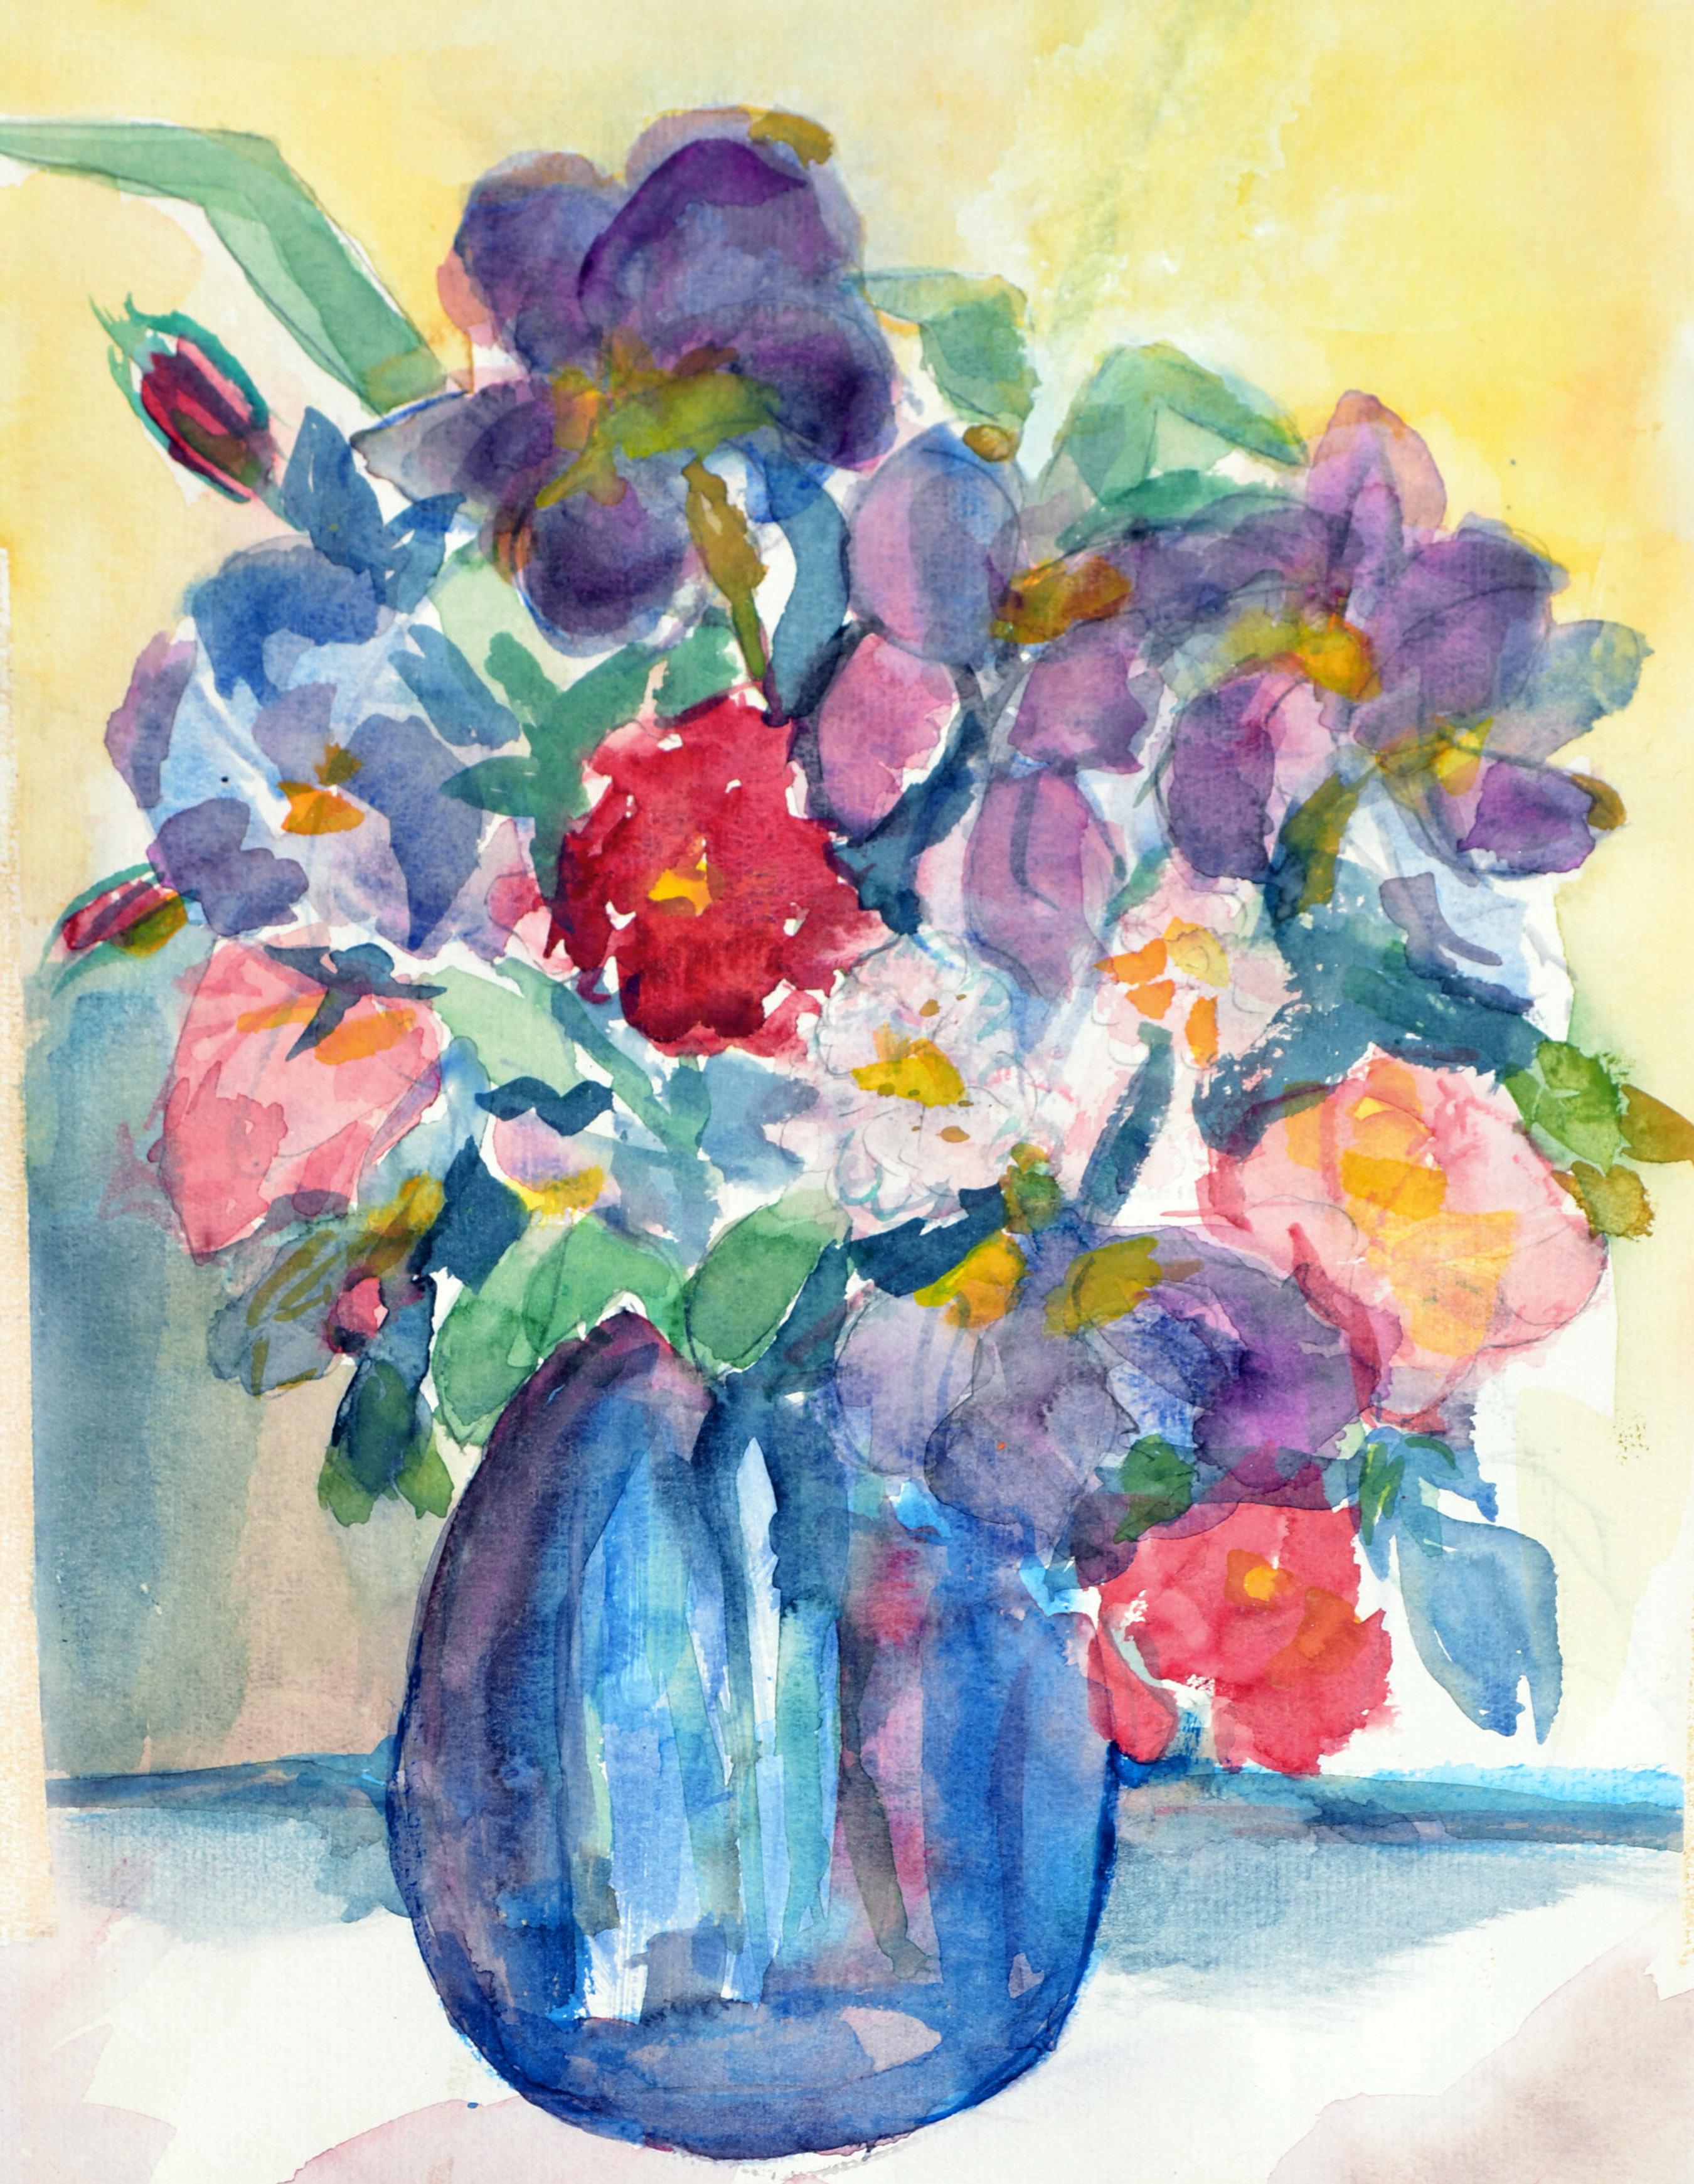 Bouquet with Blue Vase Floral Still-Life  - American Impressionist Art by Sarah C. Flower 